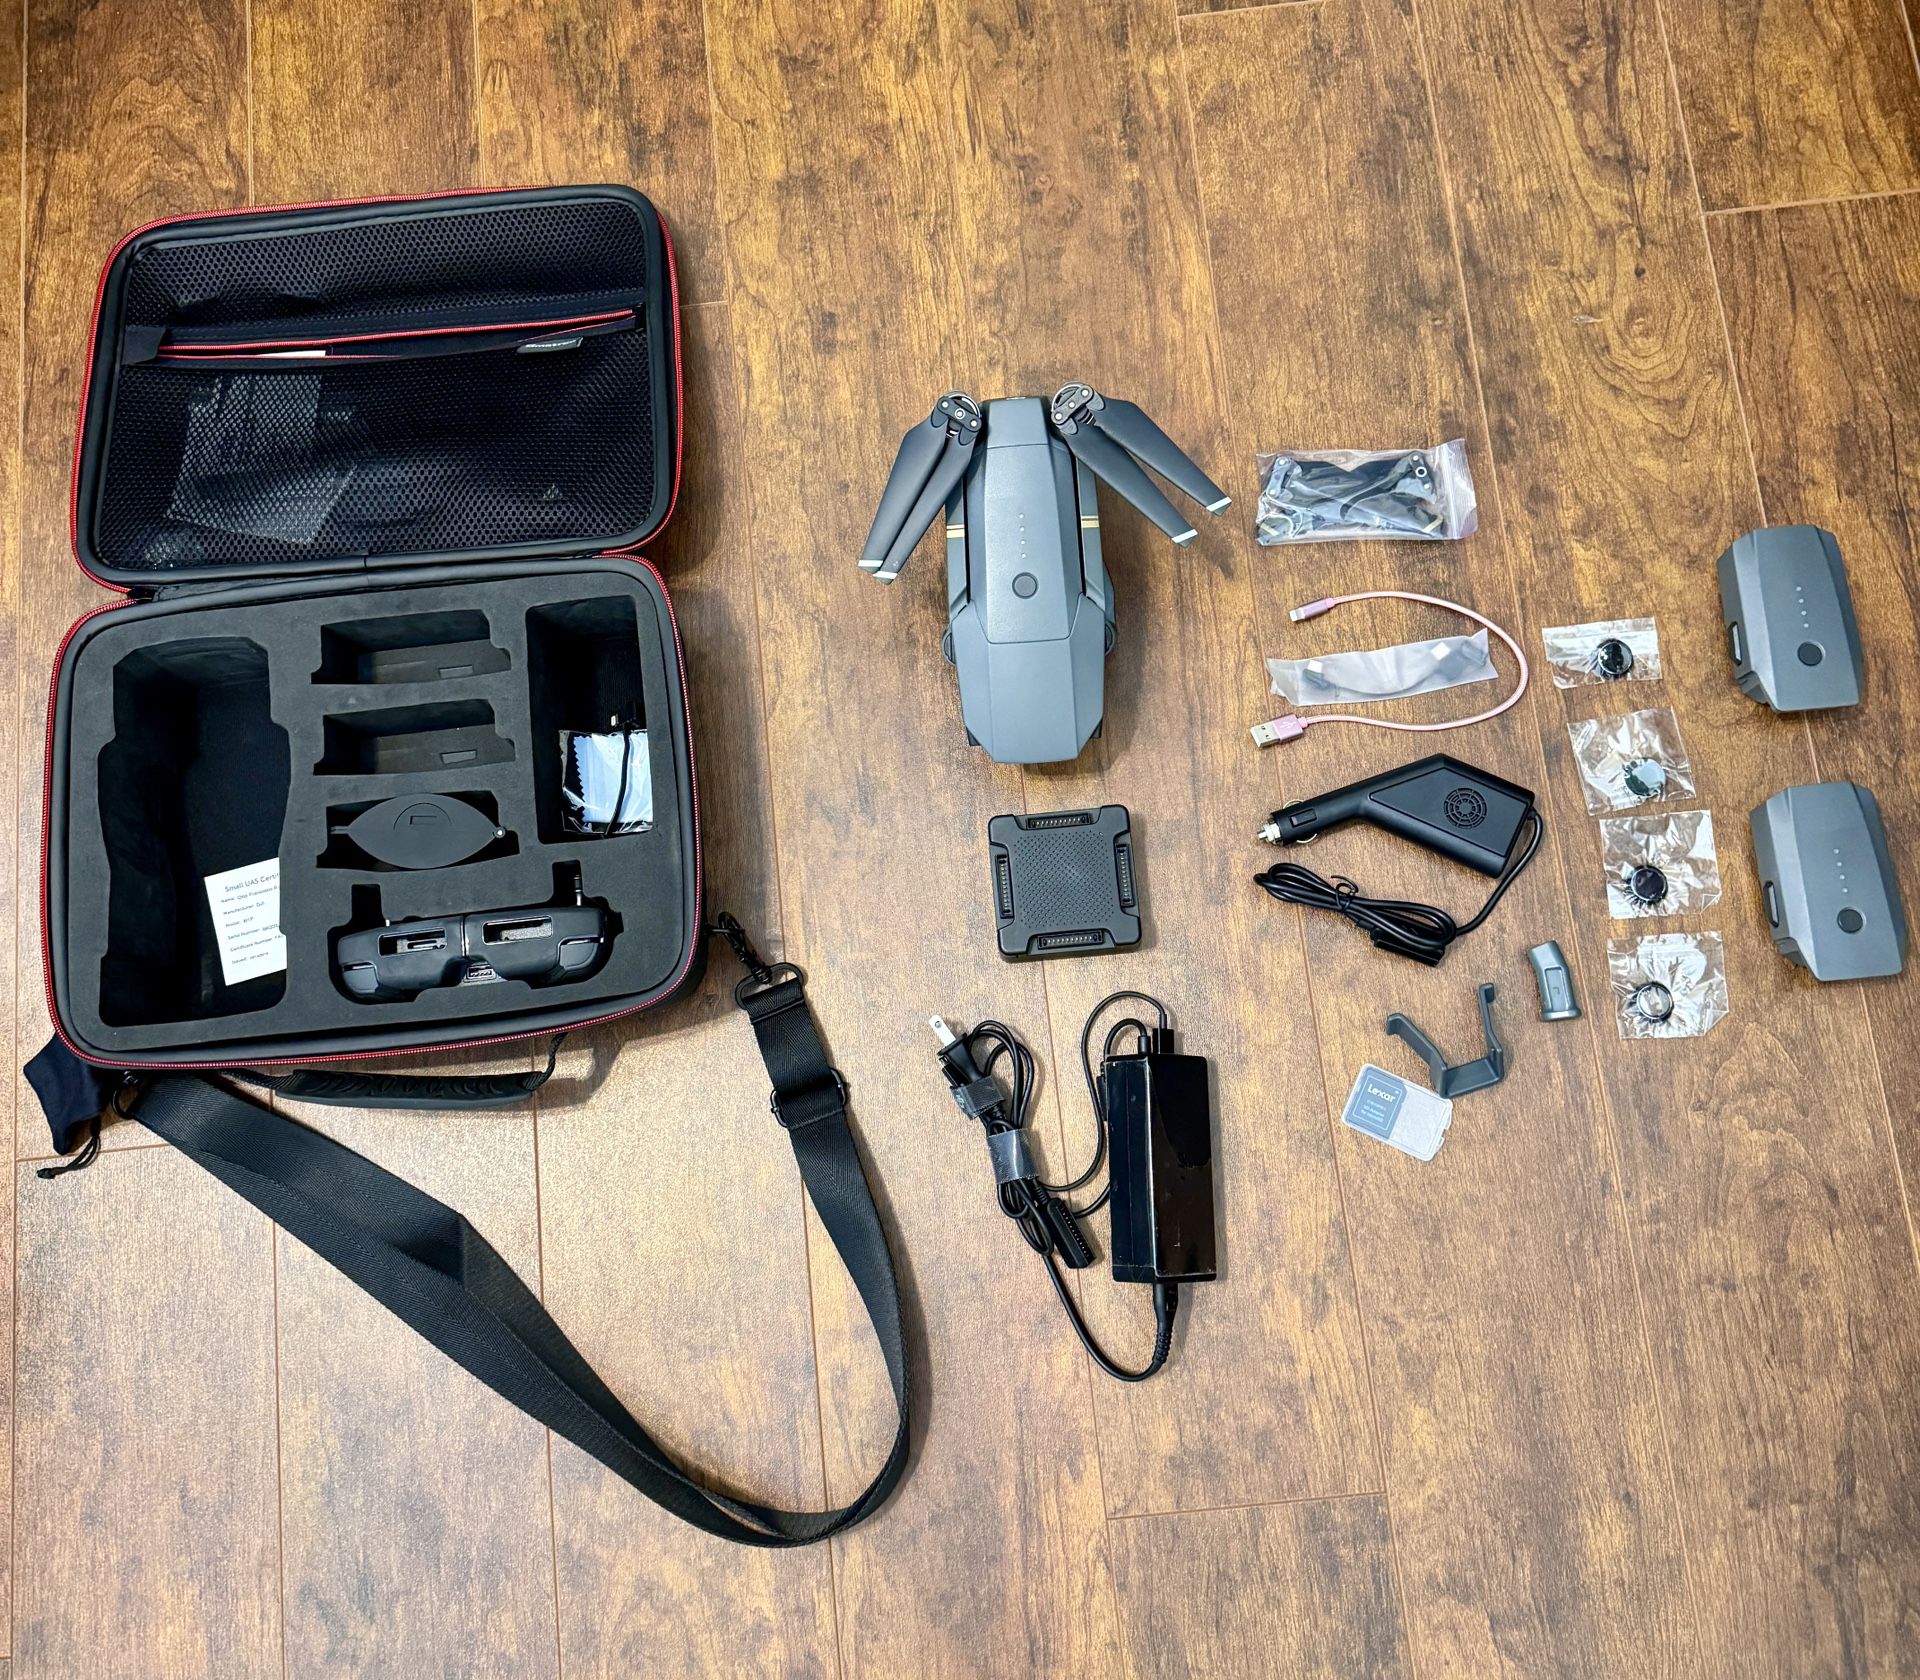 DJI - Mavic Pro with Remote (Gray) and lots of accessories. Kendall Area